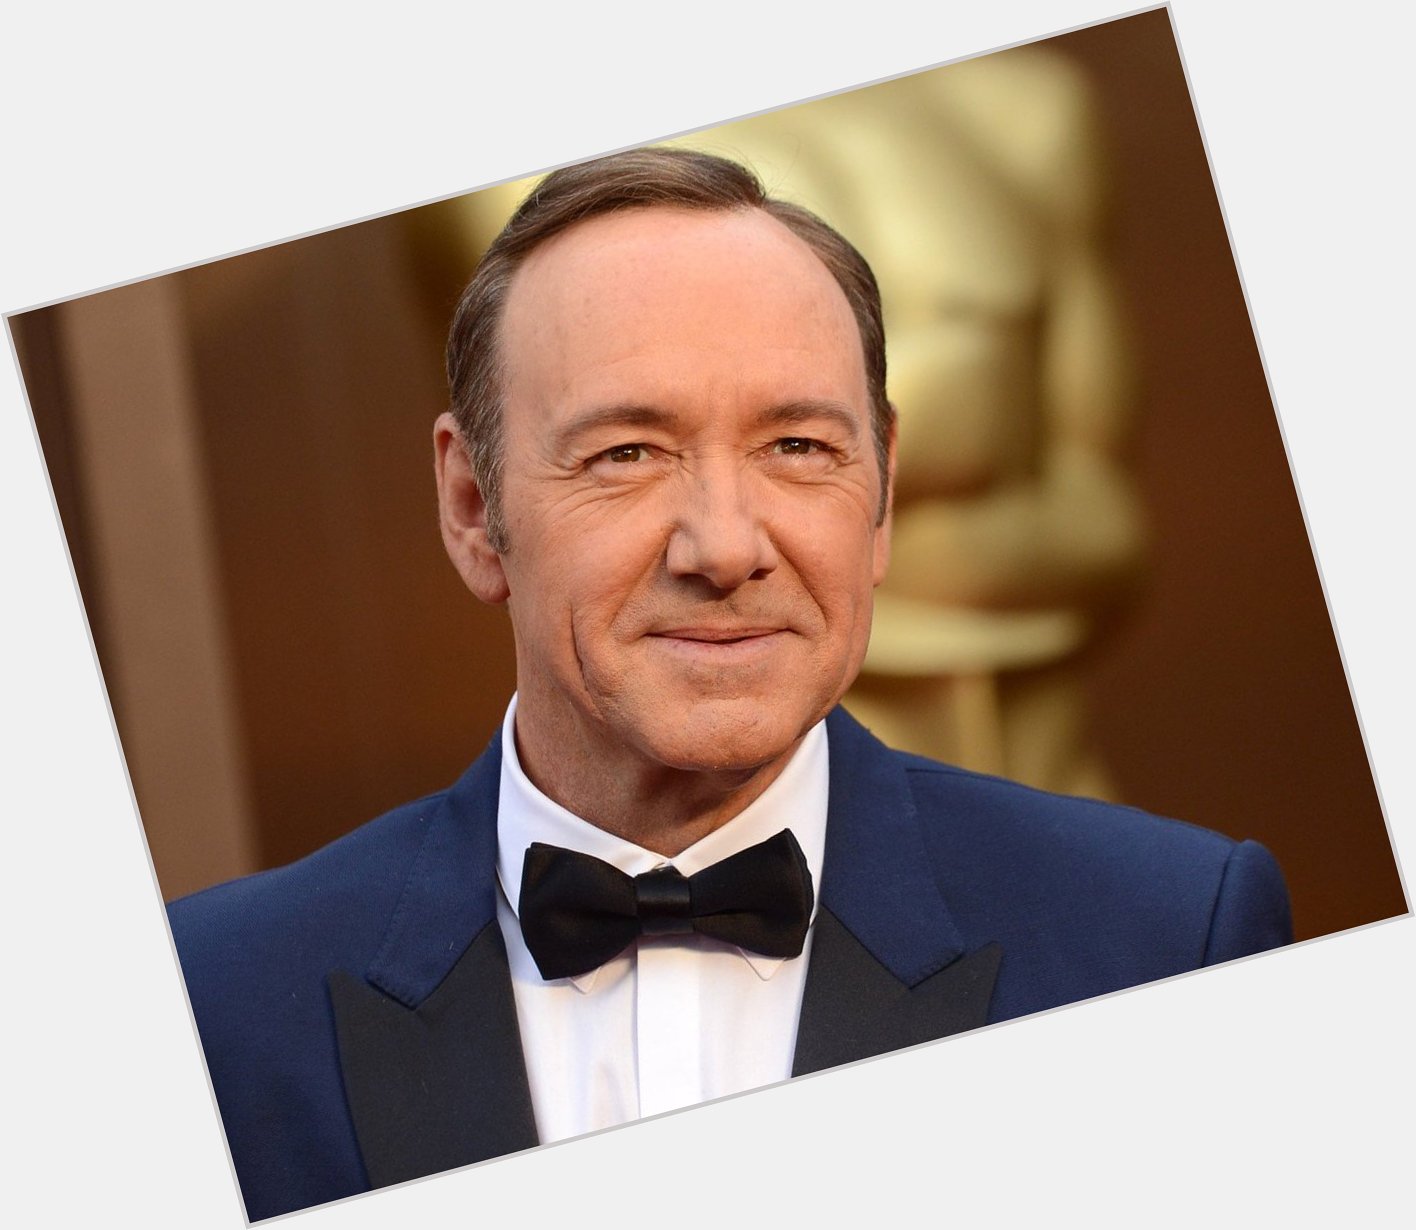 ~Happy birthday to Kevin Spacey! The actor turns 58 today~   